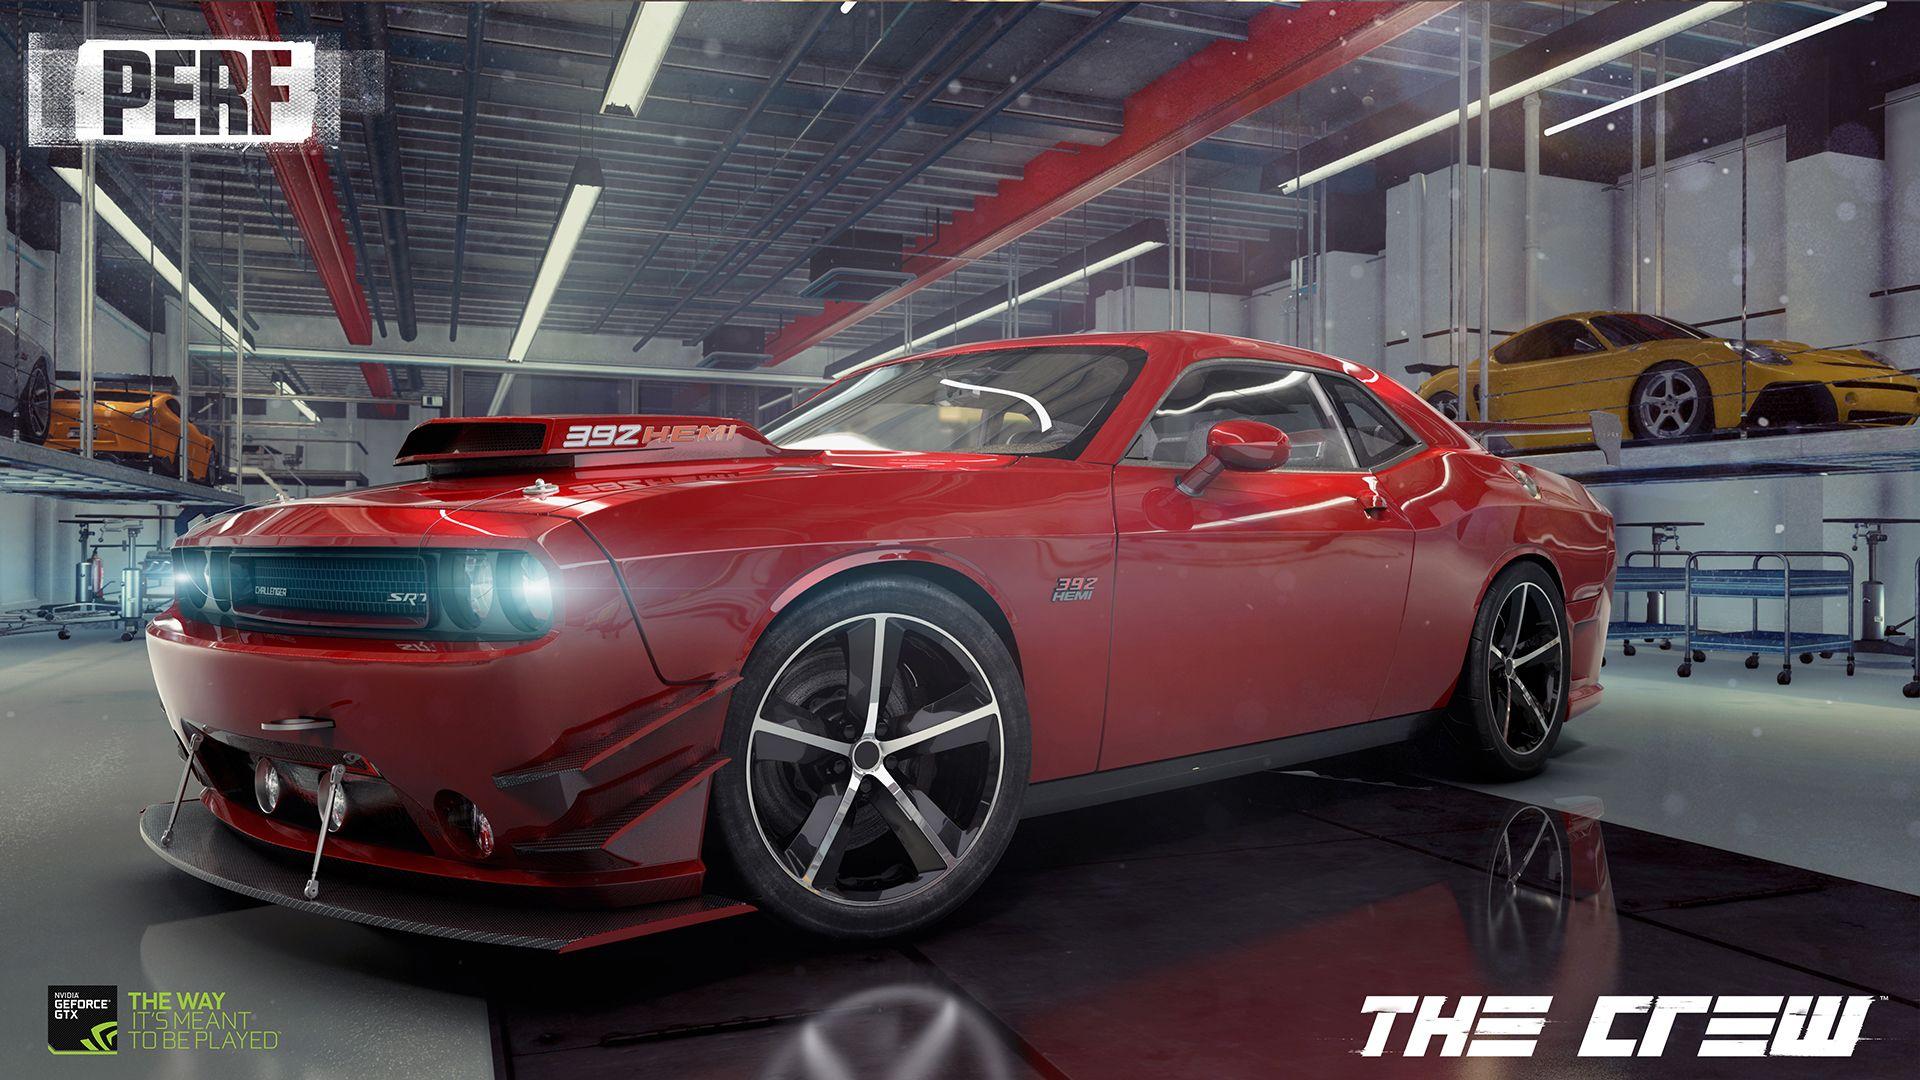 The Crew Races Into Stores With NVIDIA GameWorks Technology